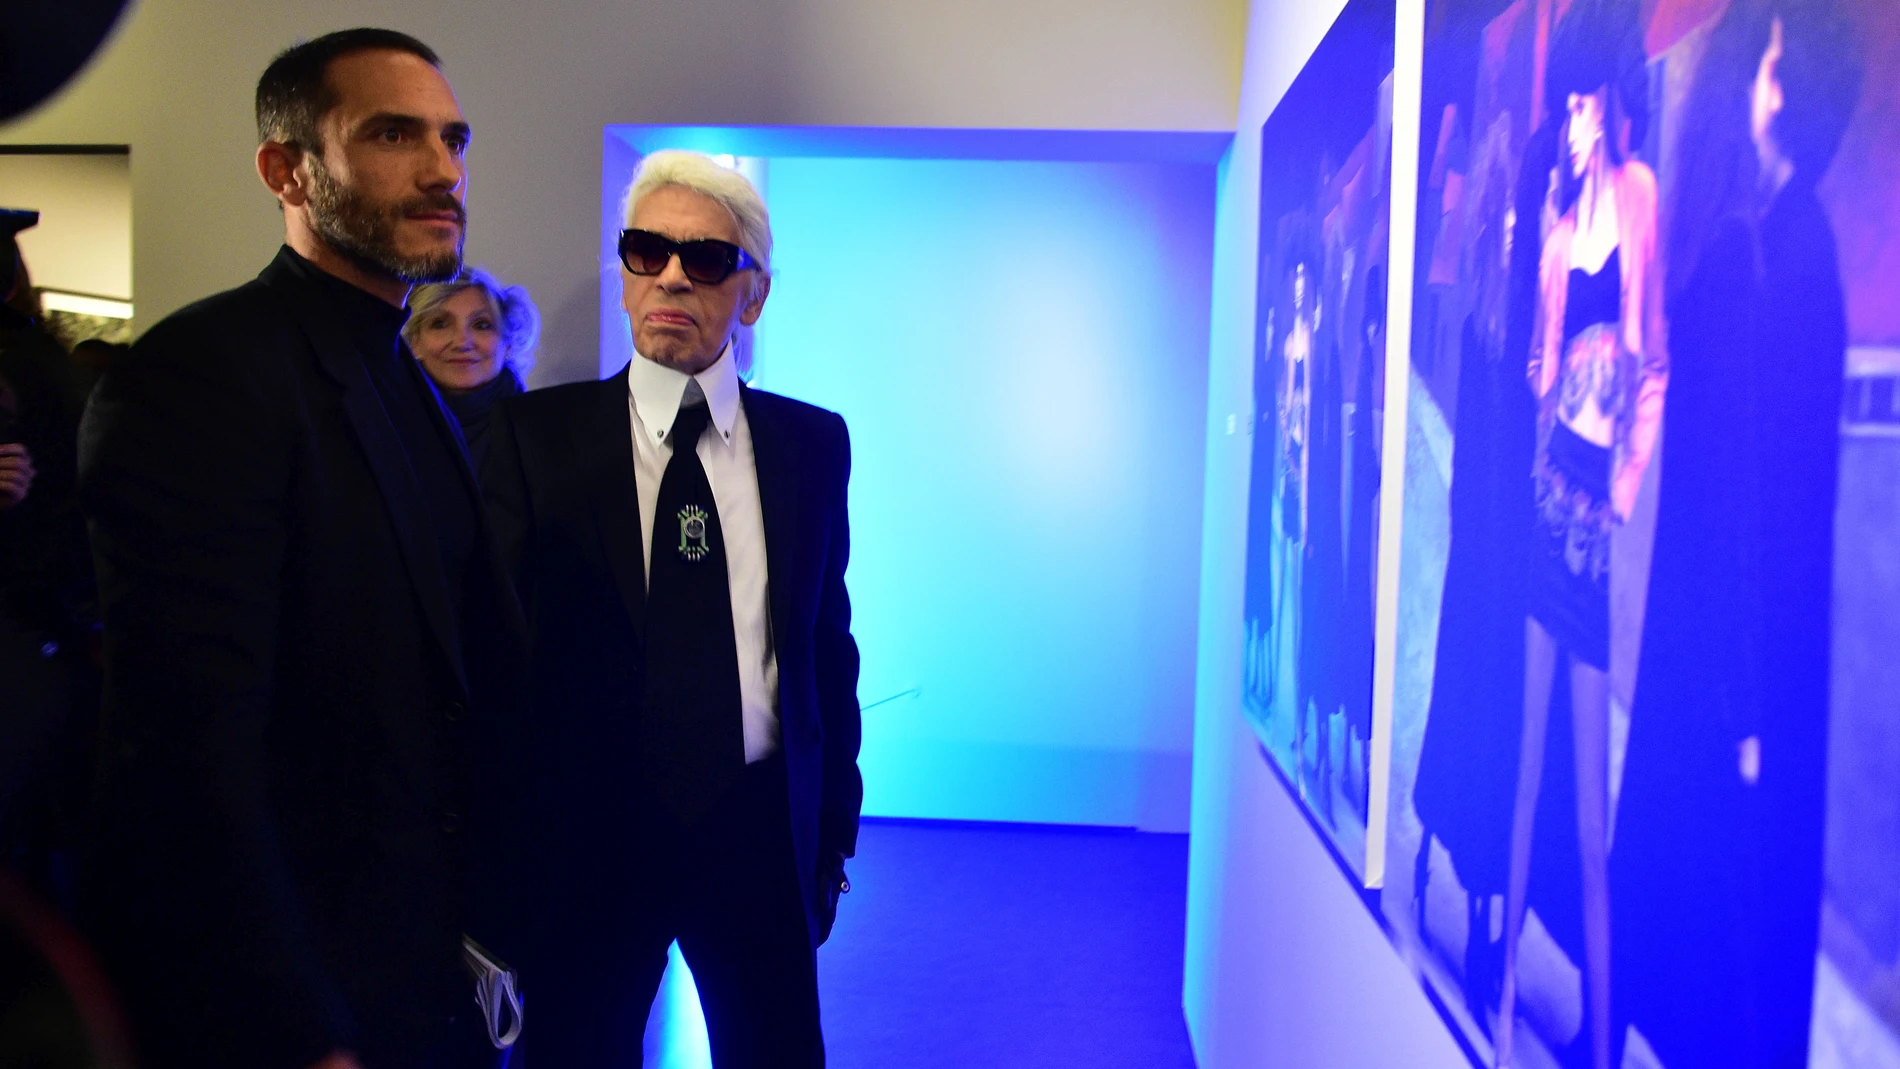 Designer Karl Lagerfeld and Sébastien Jondeau during the launching of his exhibition "Karl Lagerfeld, A Visual journey" in Paris.